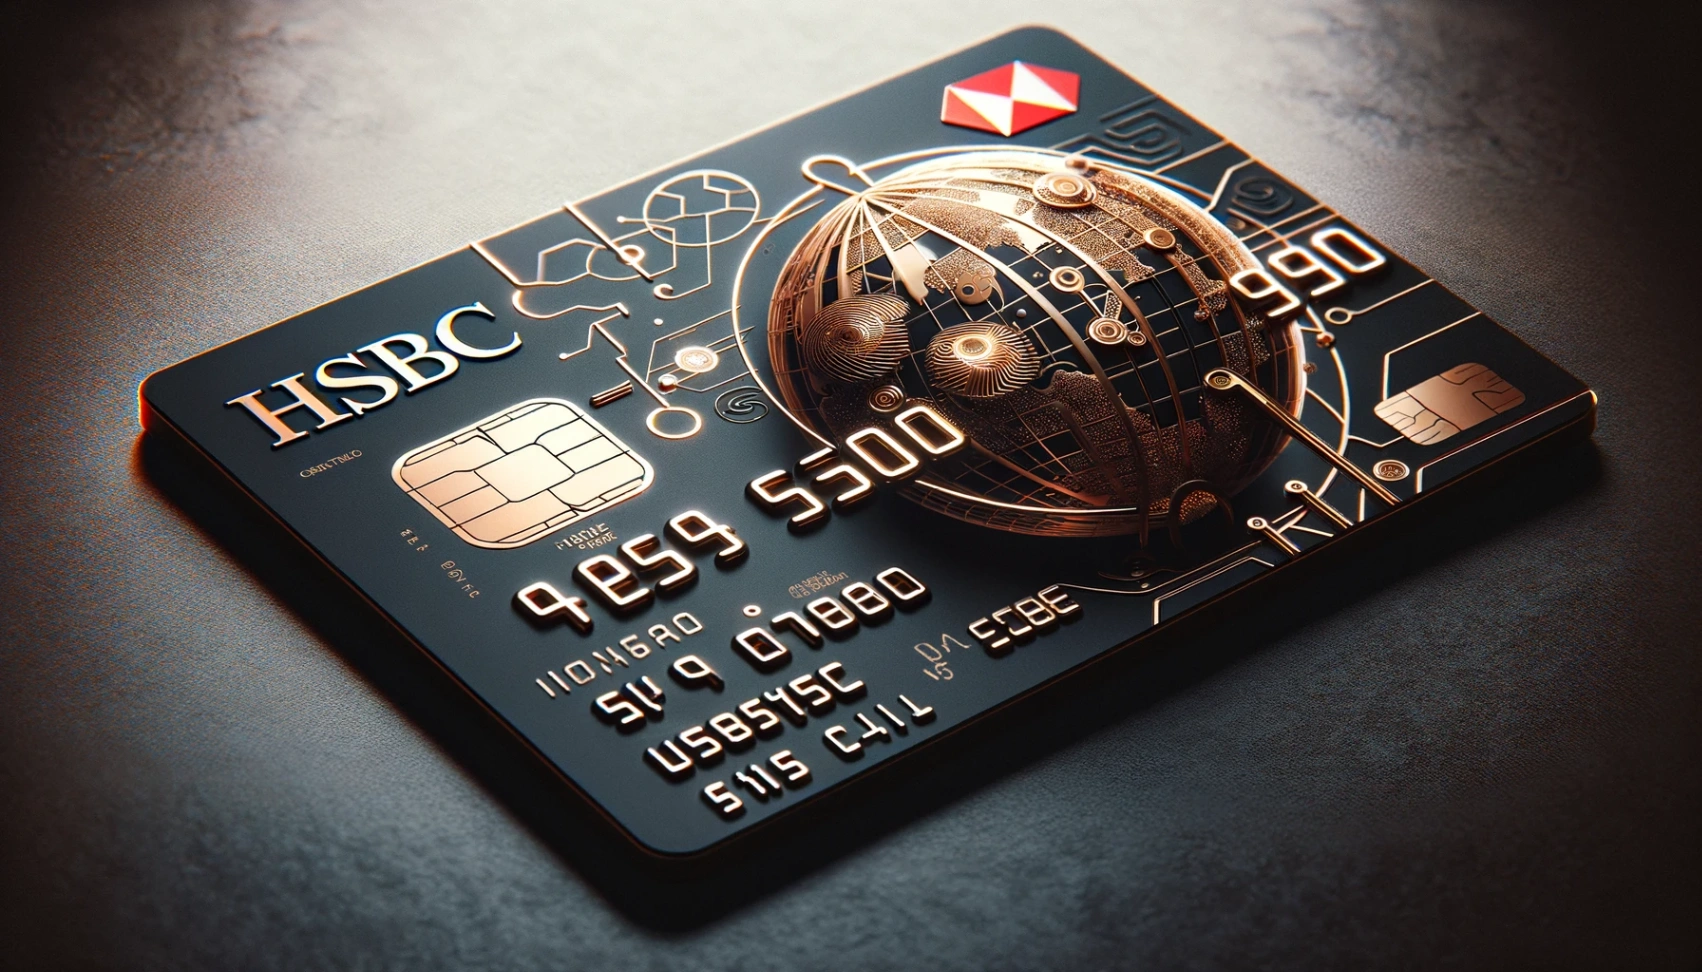 HSBC Credit Card - Learn How to Apply Now